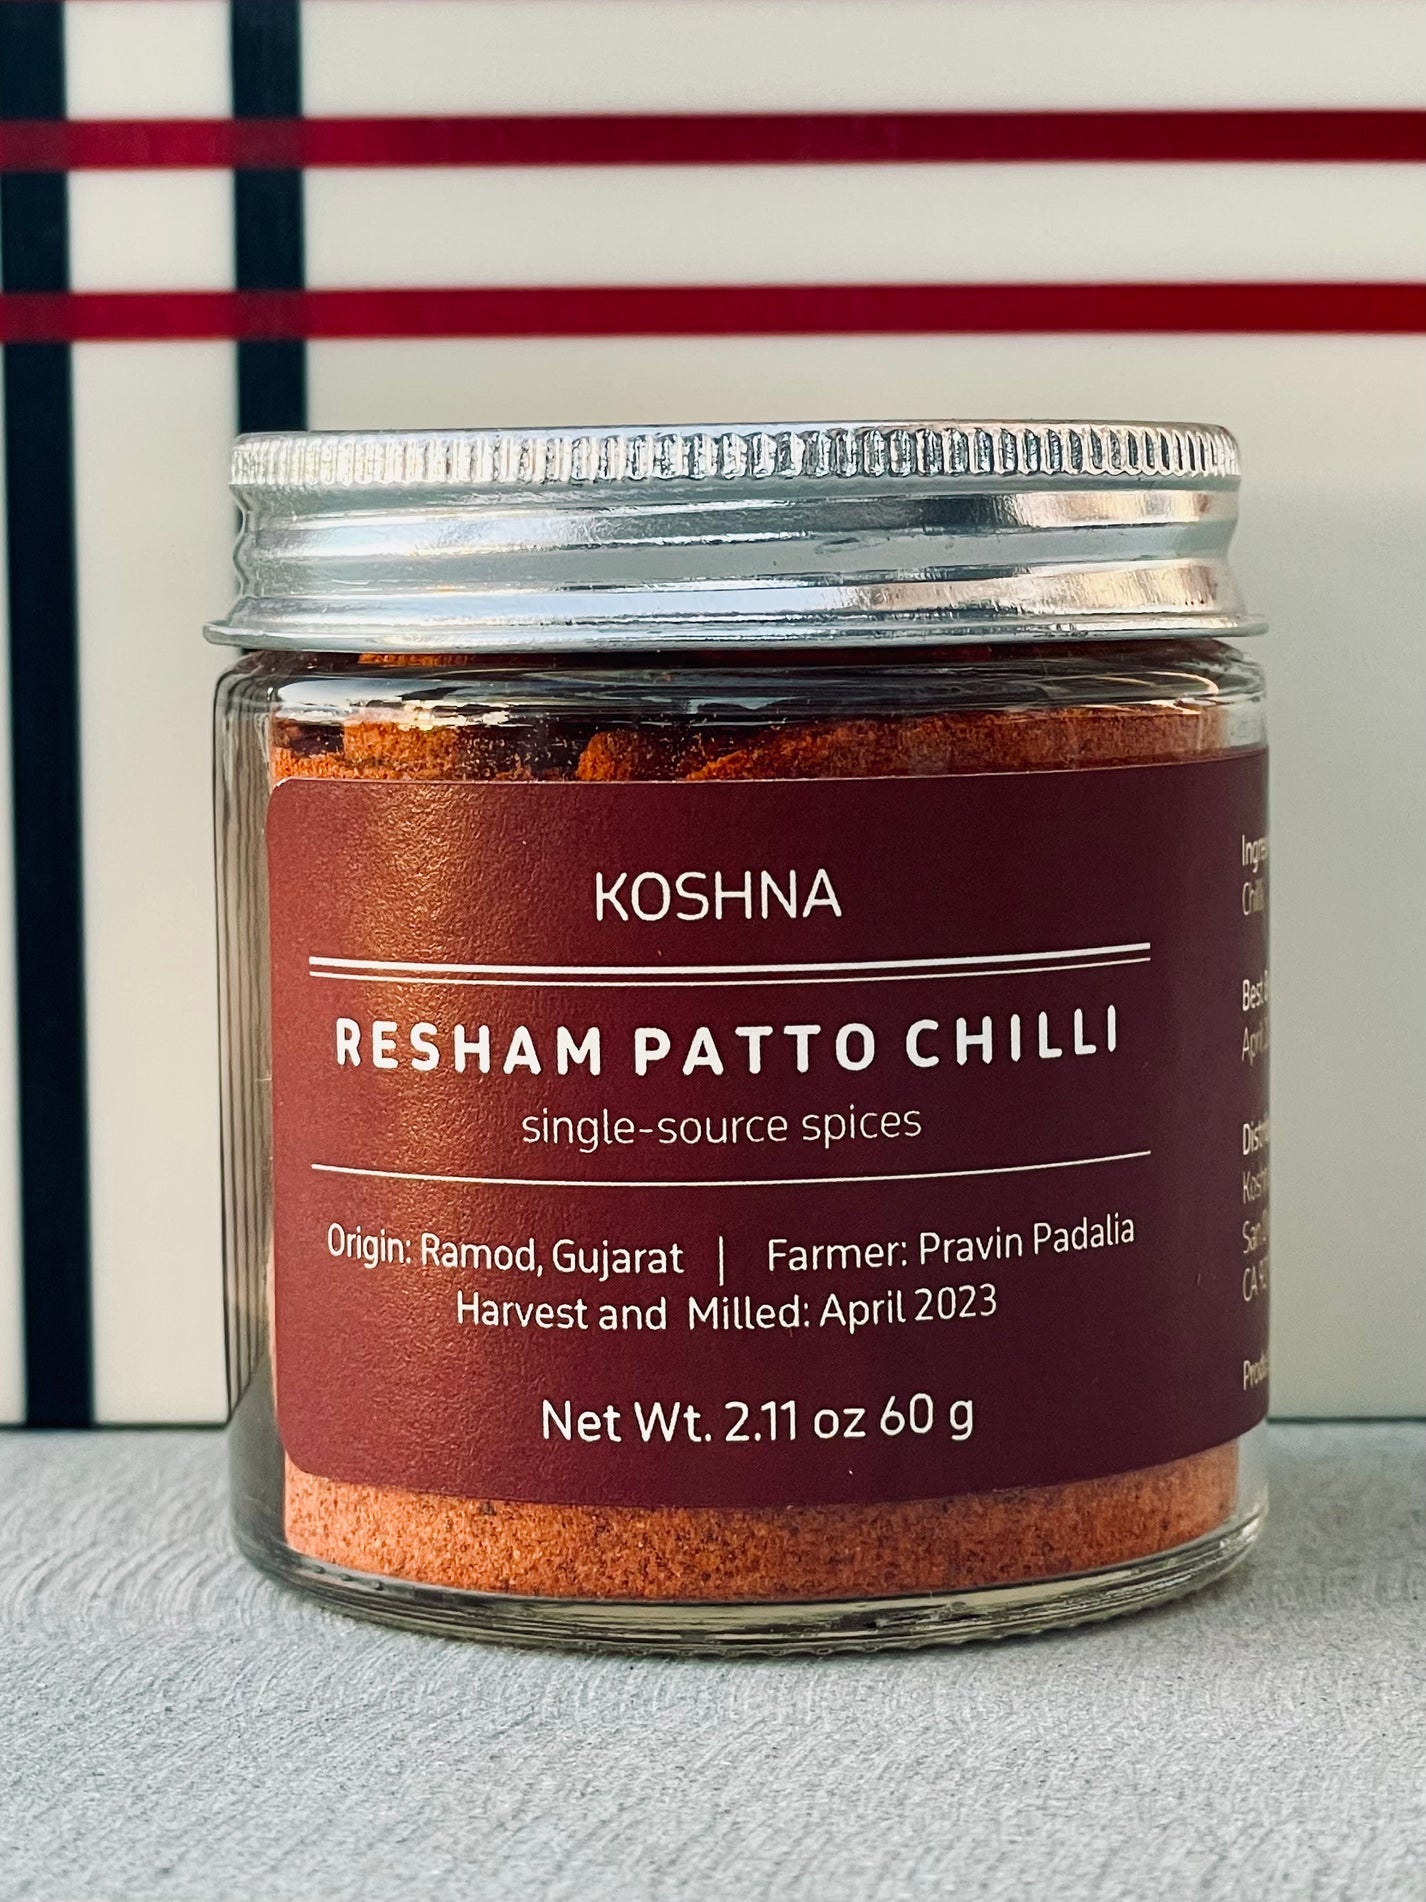 koshna spices / A native chilli variety with intensely fruity, sweet and tangy flavors and an aroma that is reminiscent of ripe tomatoes, plums and kumquats. We almost want to bite into it. Simply put, it’s summer in a jar.